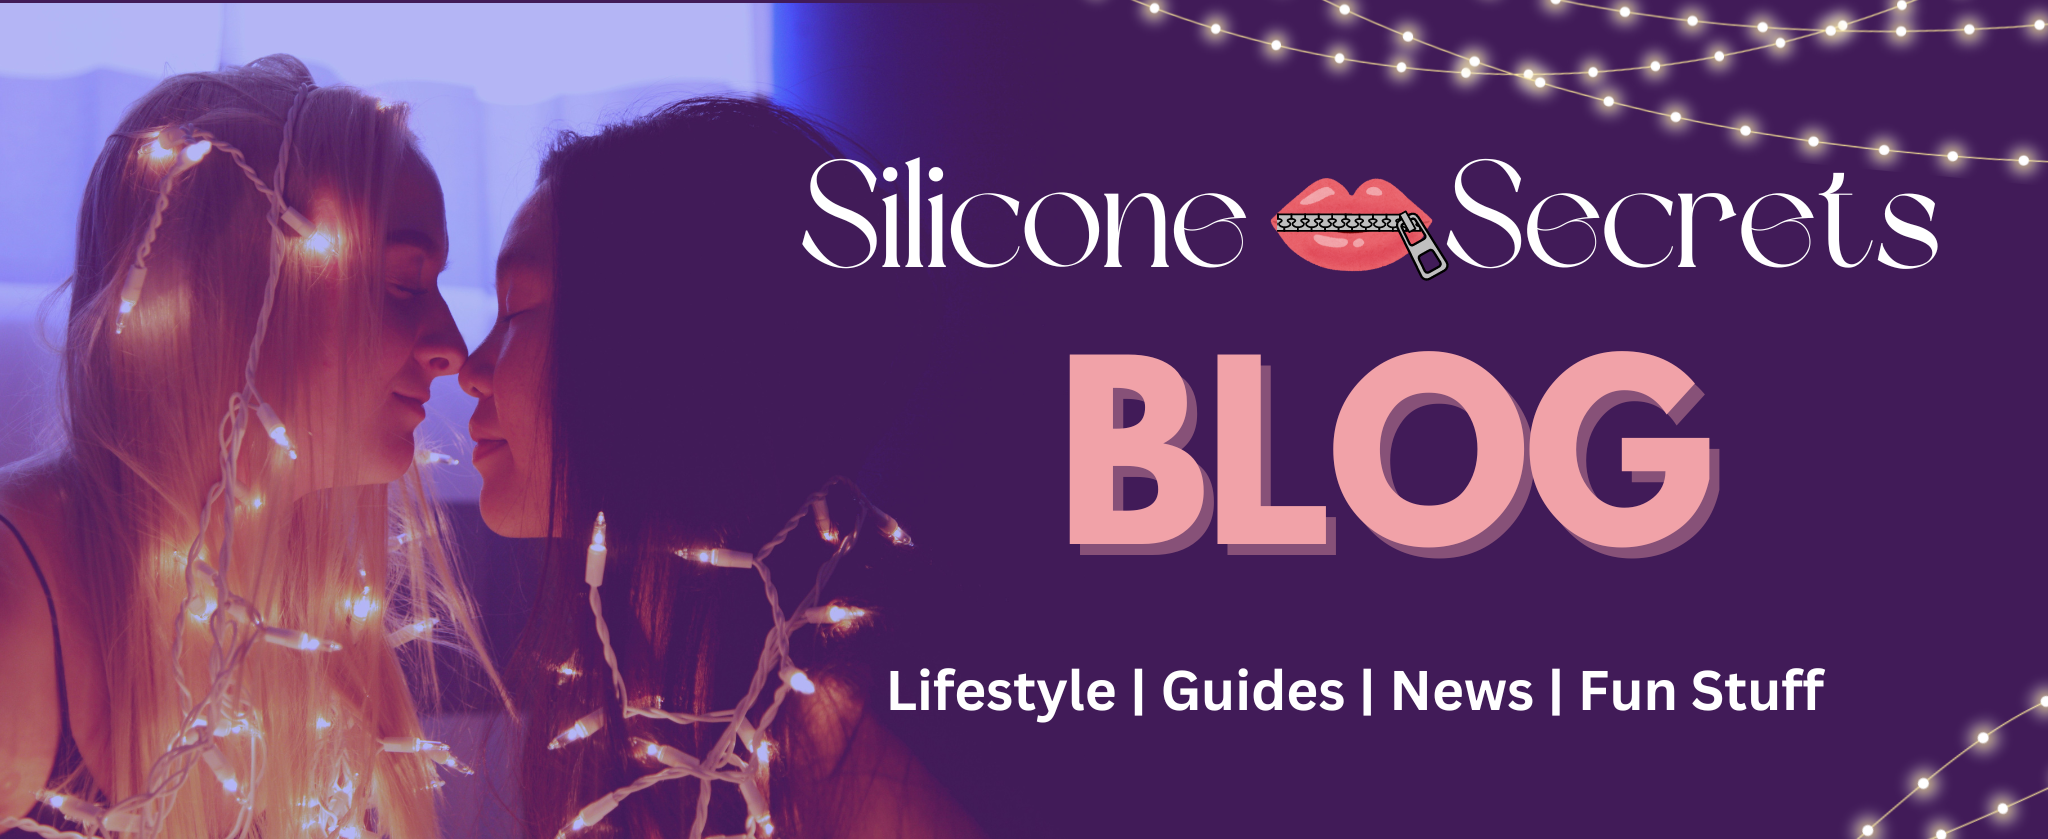 Check out The Silicone Secrets Blog for more on Lifestyles, Relationships, News , Fun Stuff and more...